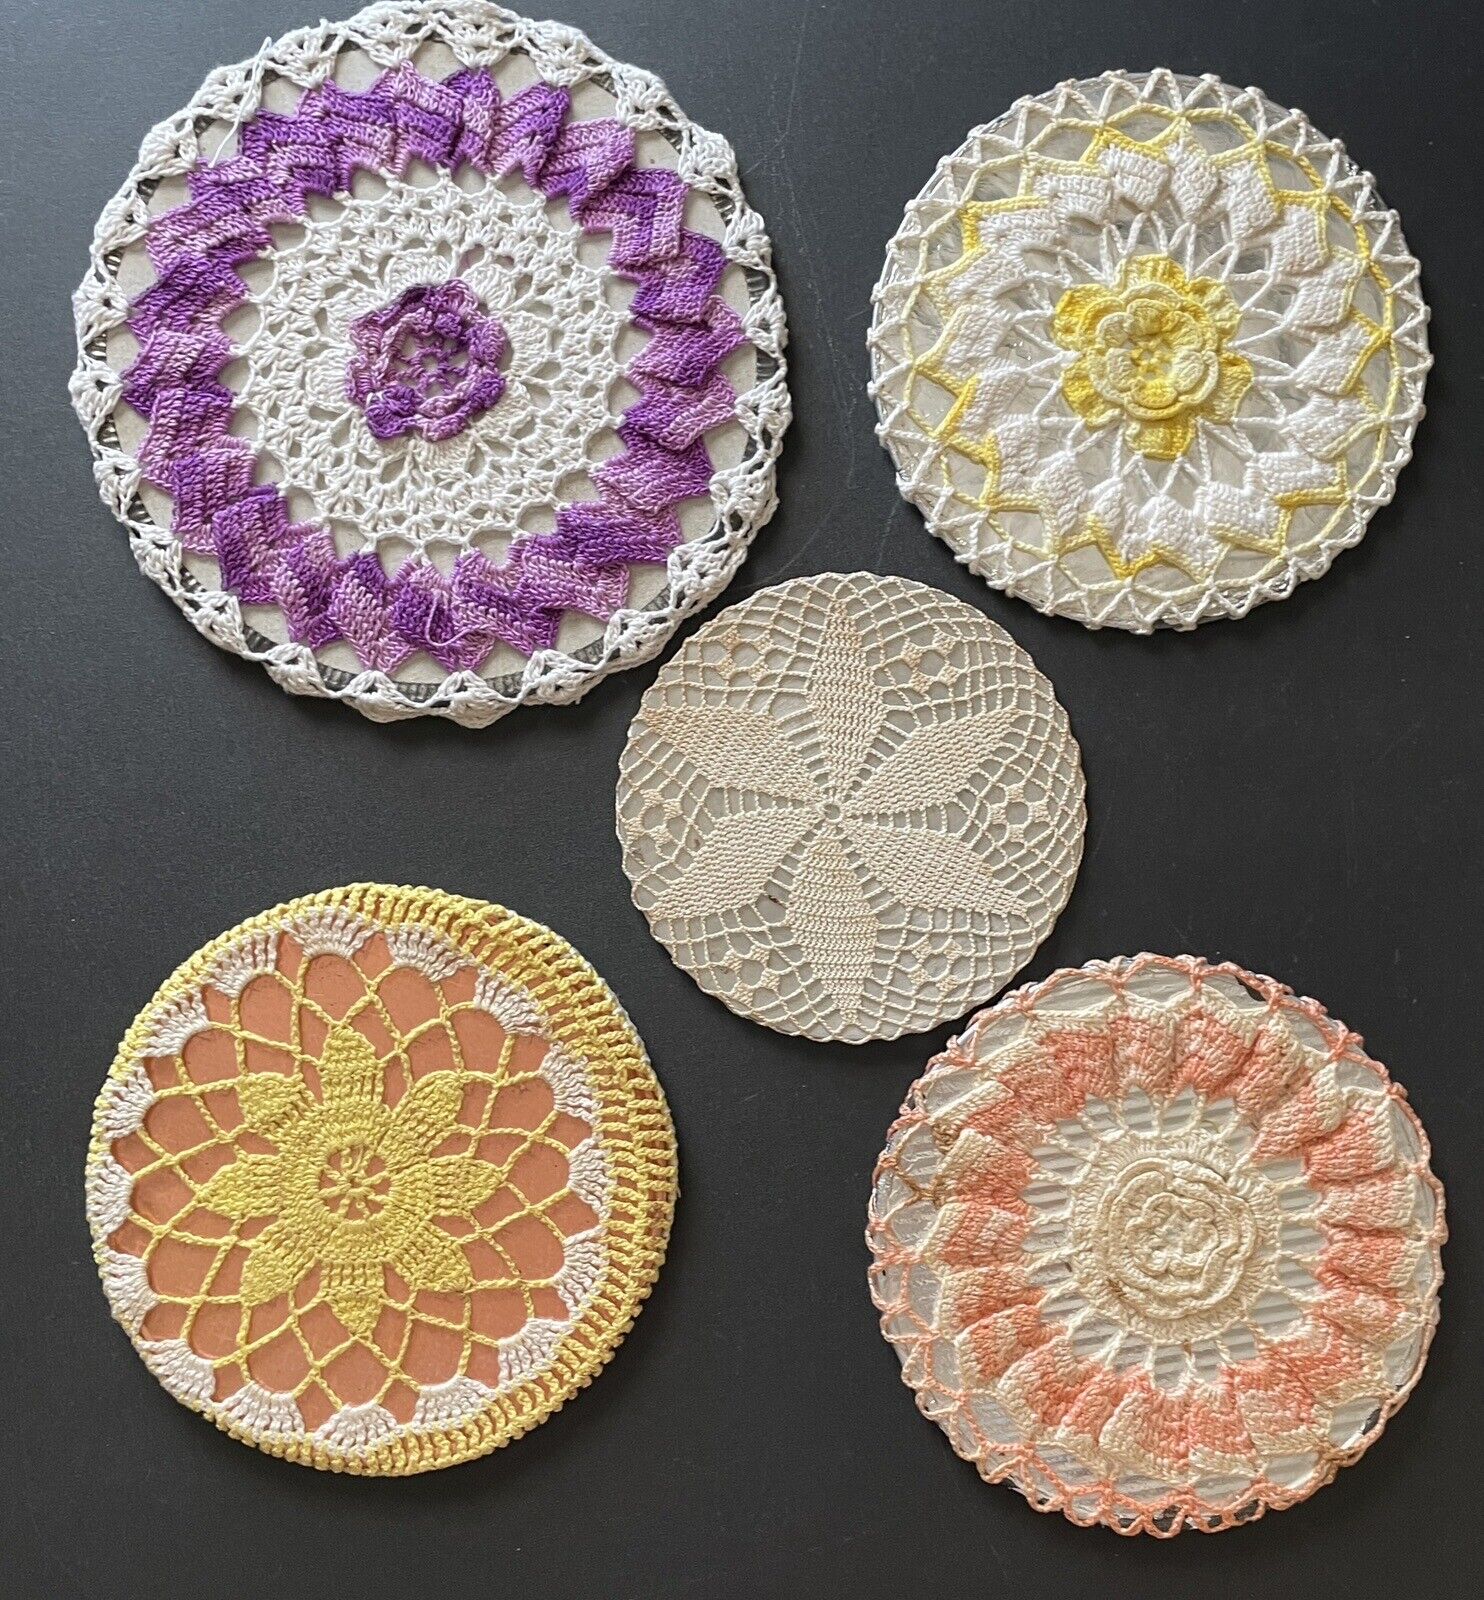 Vintage Lot of 5 Handmade Crochet Doilies Over Hot Pads Plates Need TLC 6”-9”